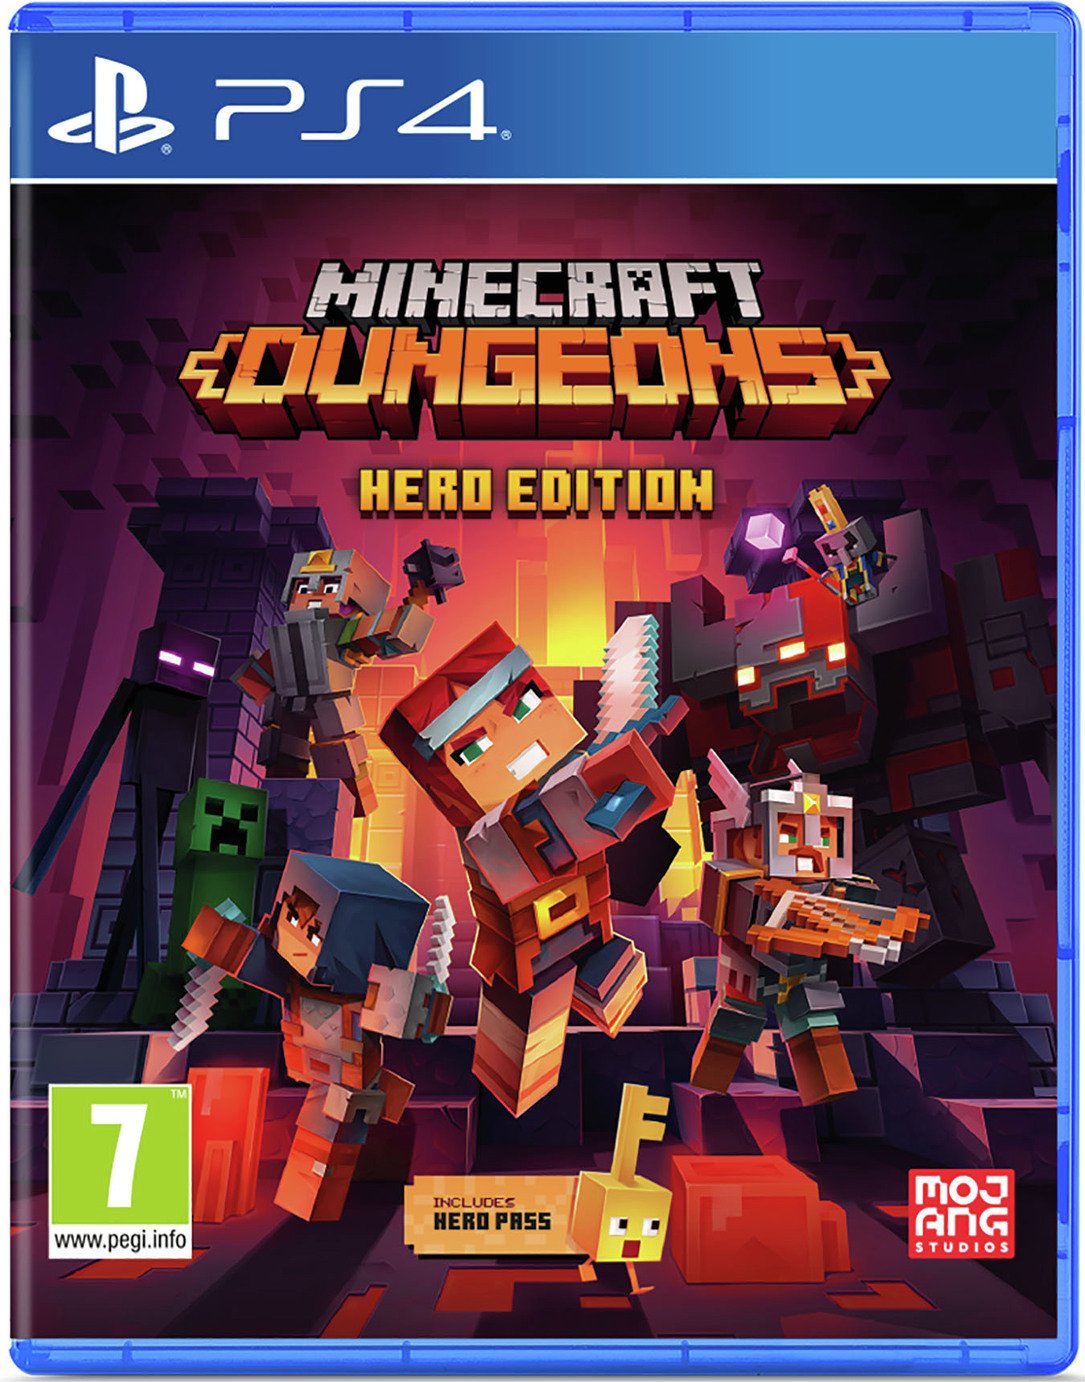 minecraft dungeons ps4 cost